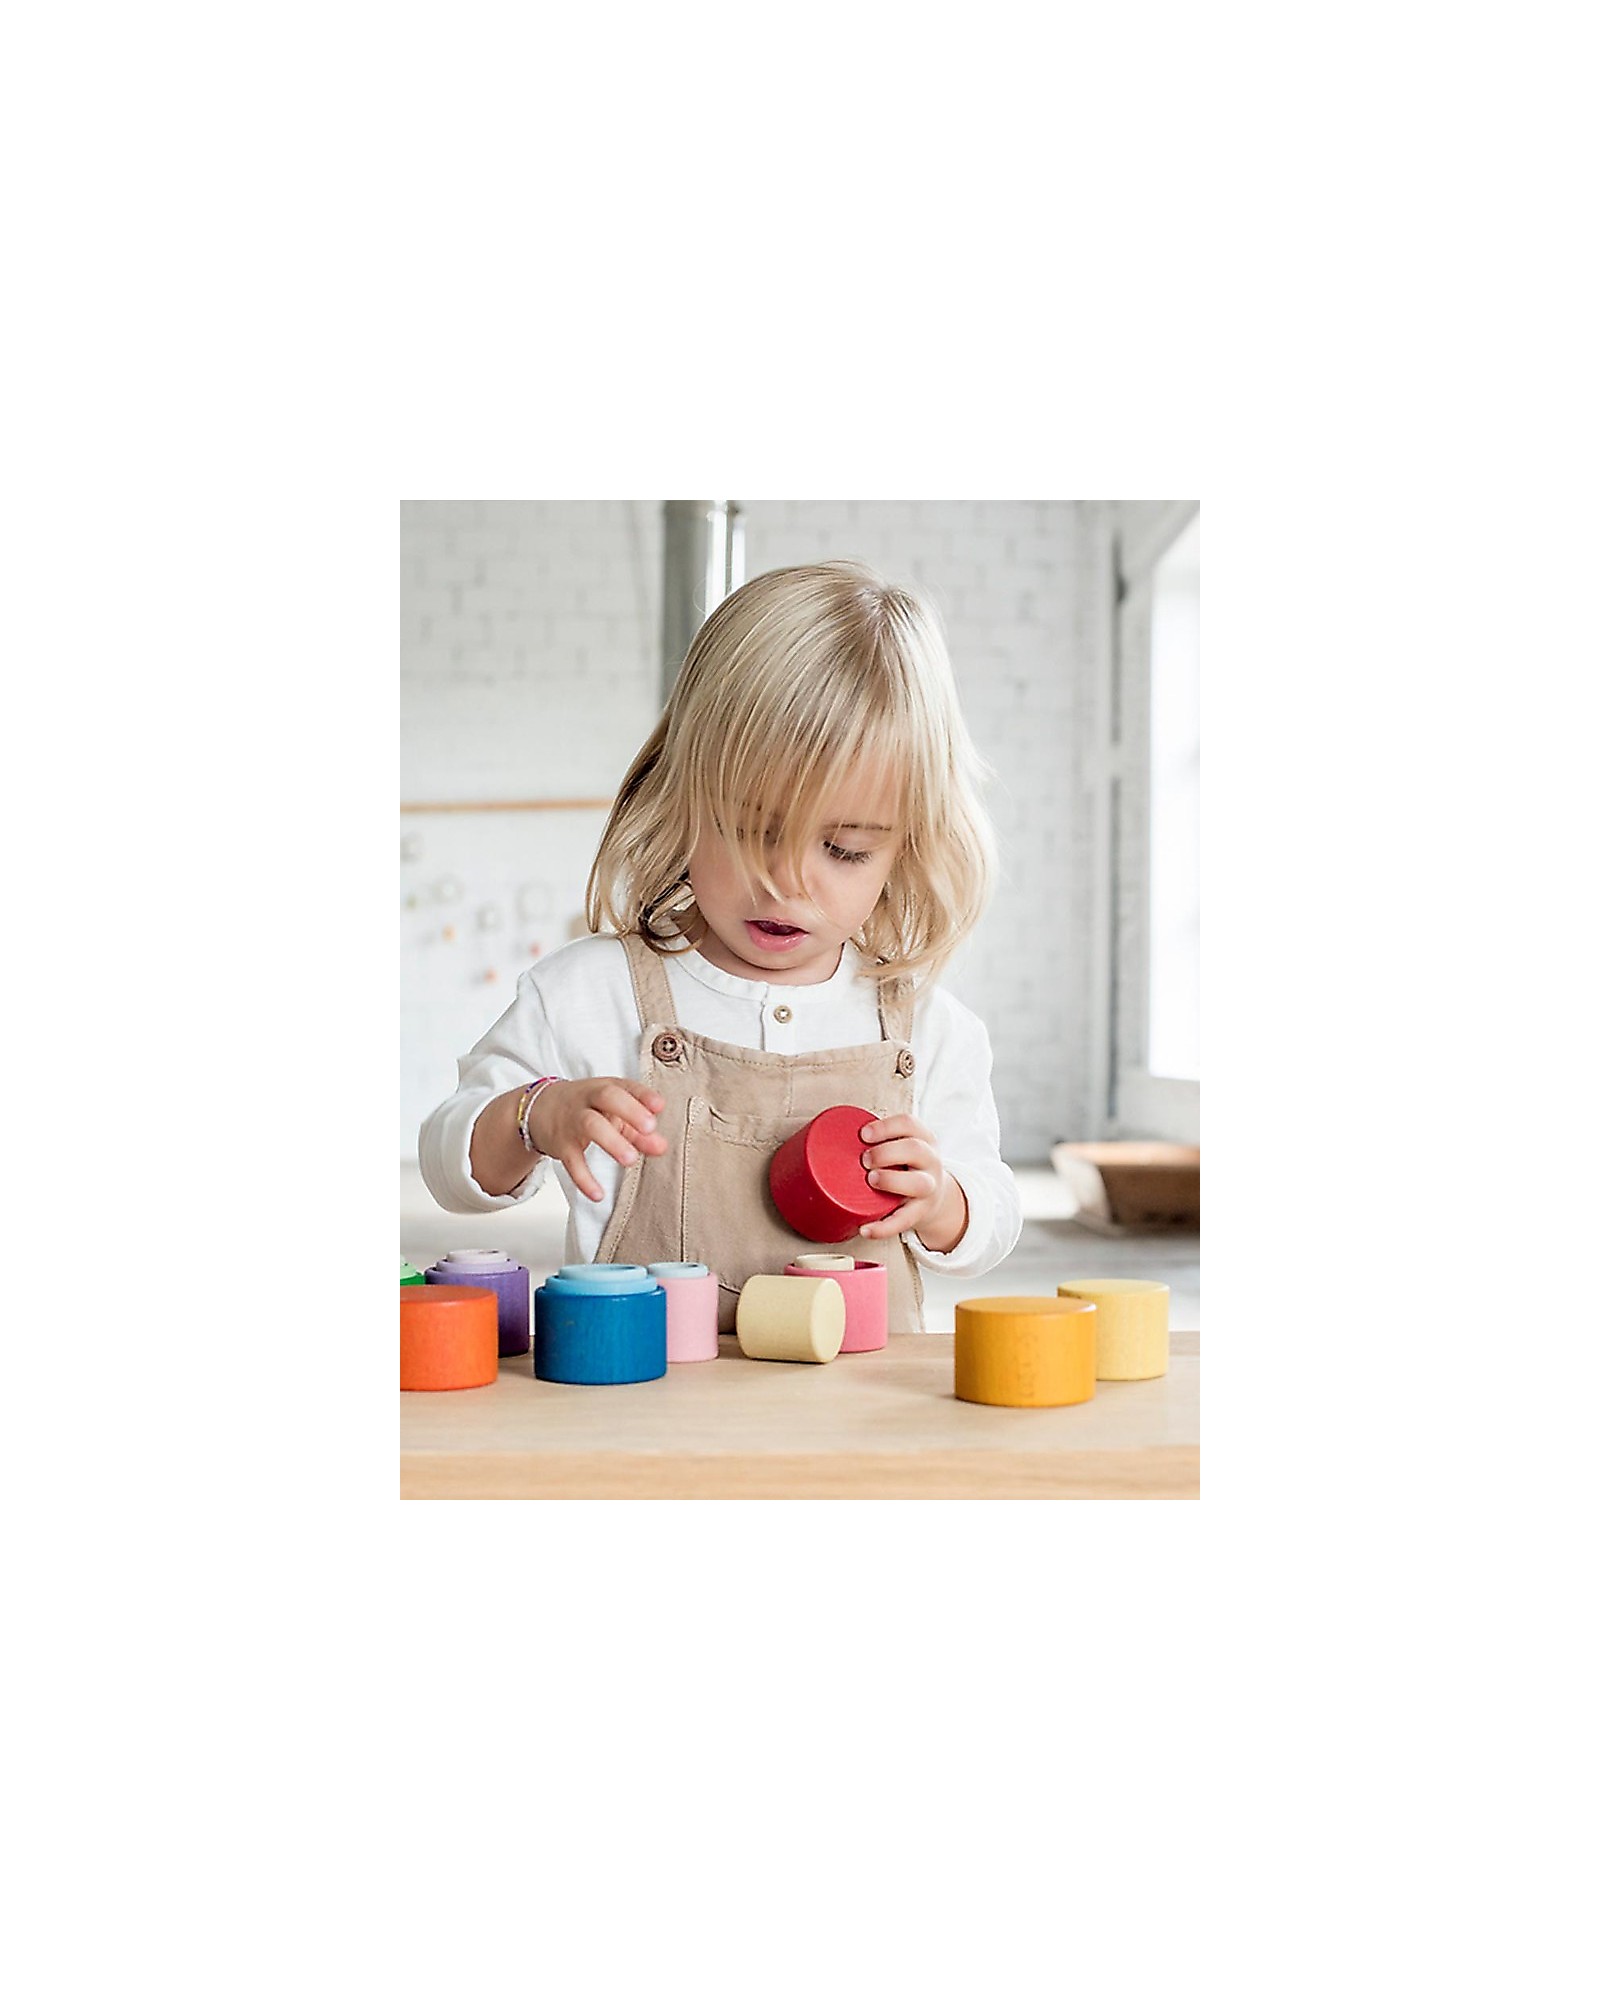 https://data.family-nation.com/imgprodotto/grapat-outlet-nest-bowl-24-pieces-in-sustainable-wood-rainbow-color-showroom-sample-wooden-stacking-toys_131448_zoom.jpg